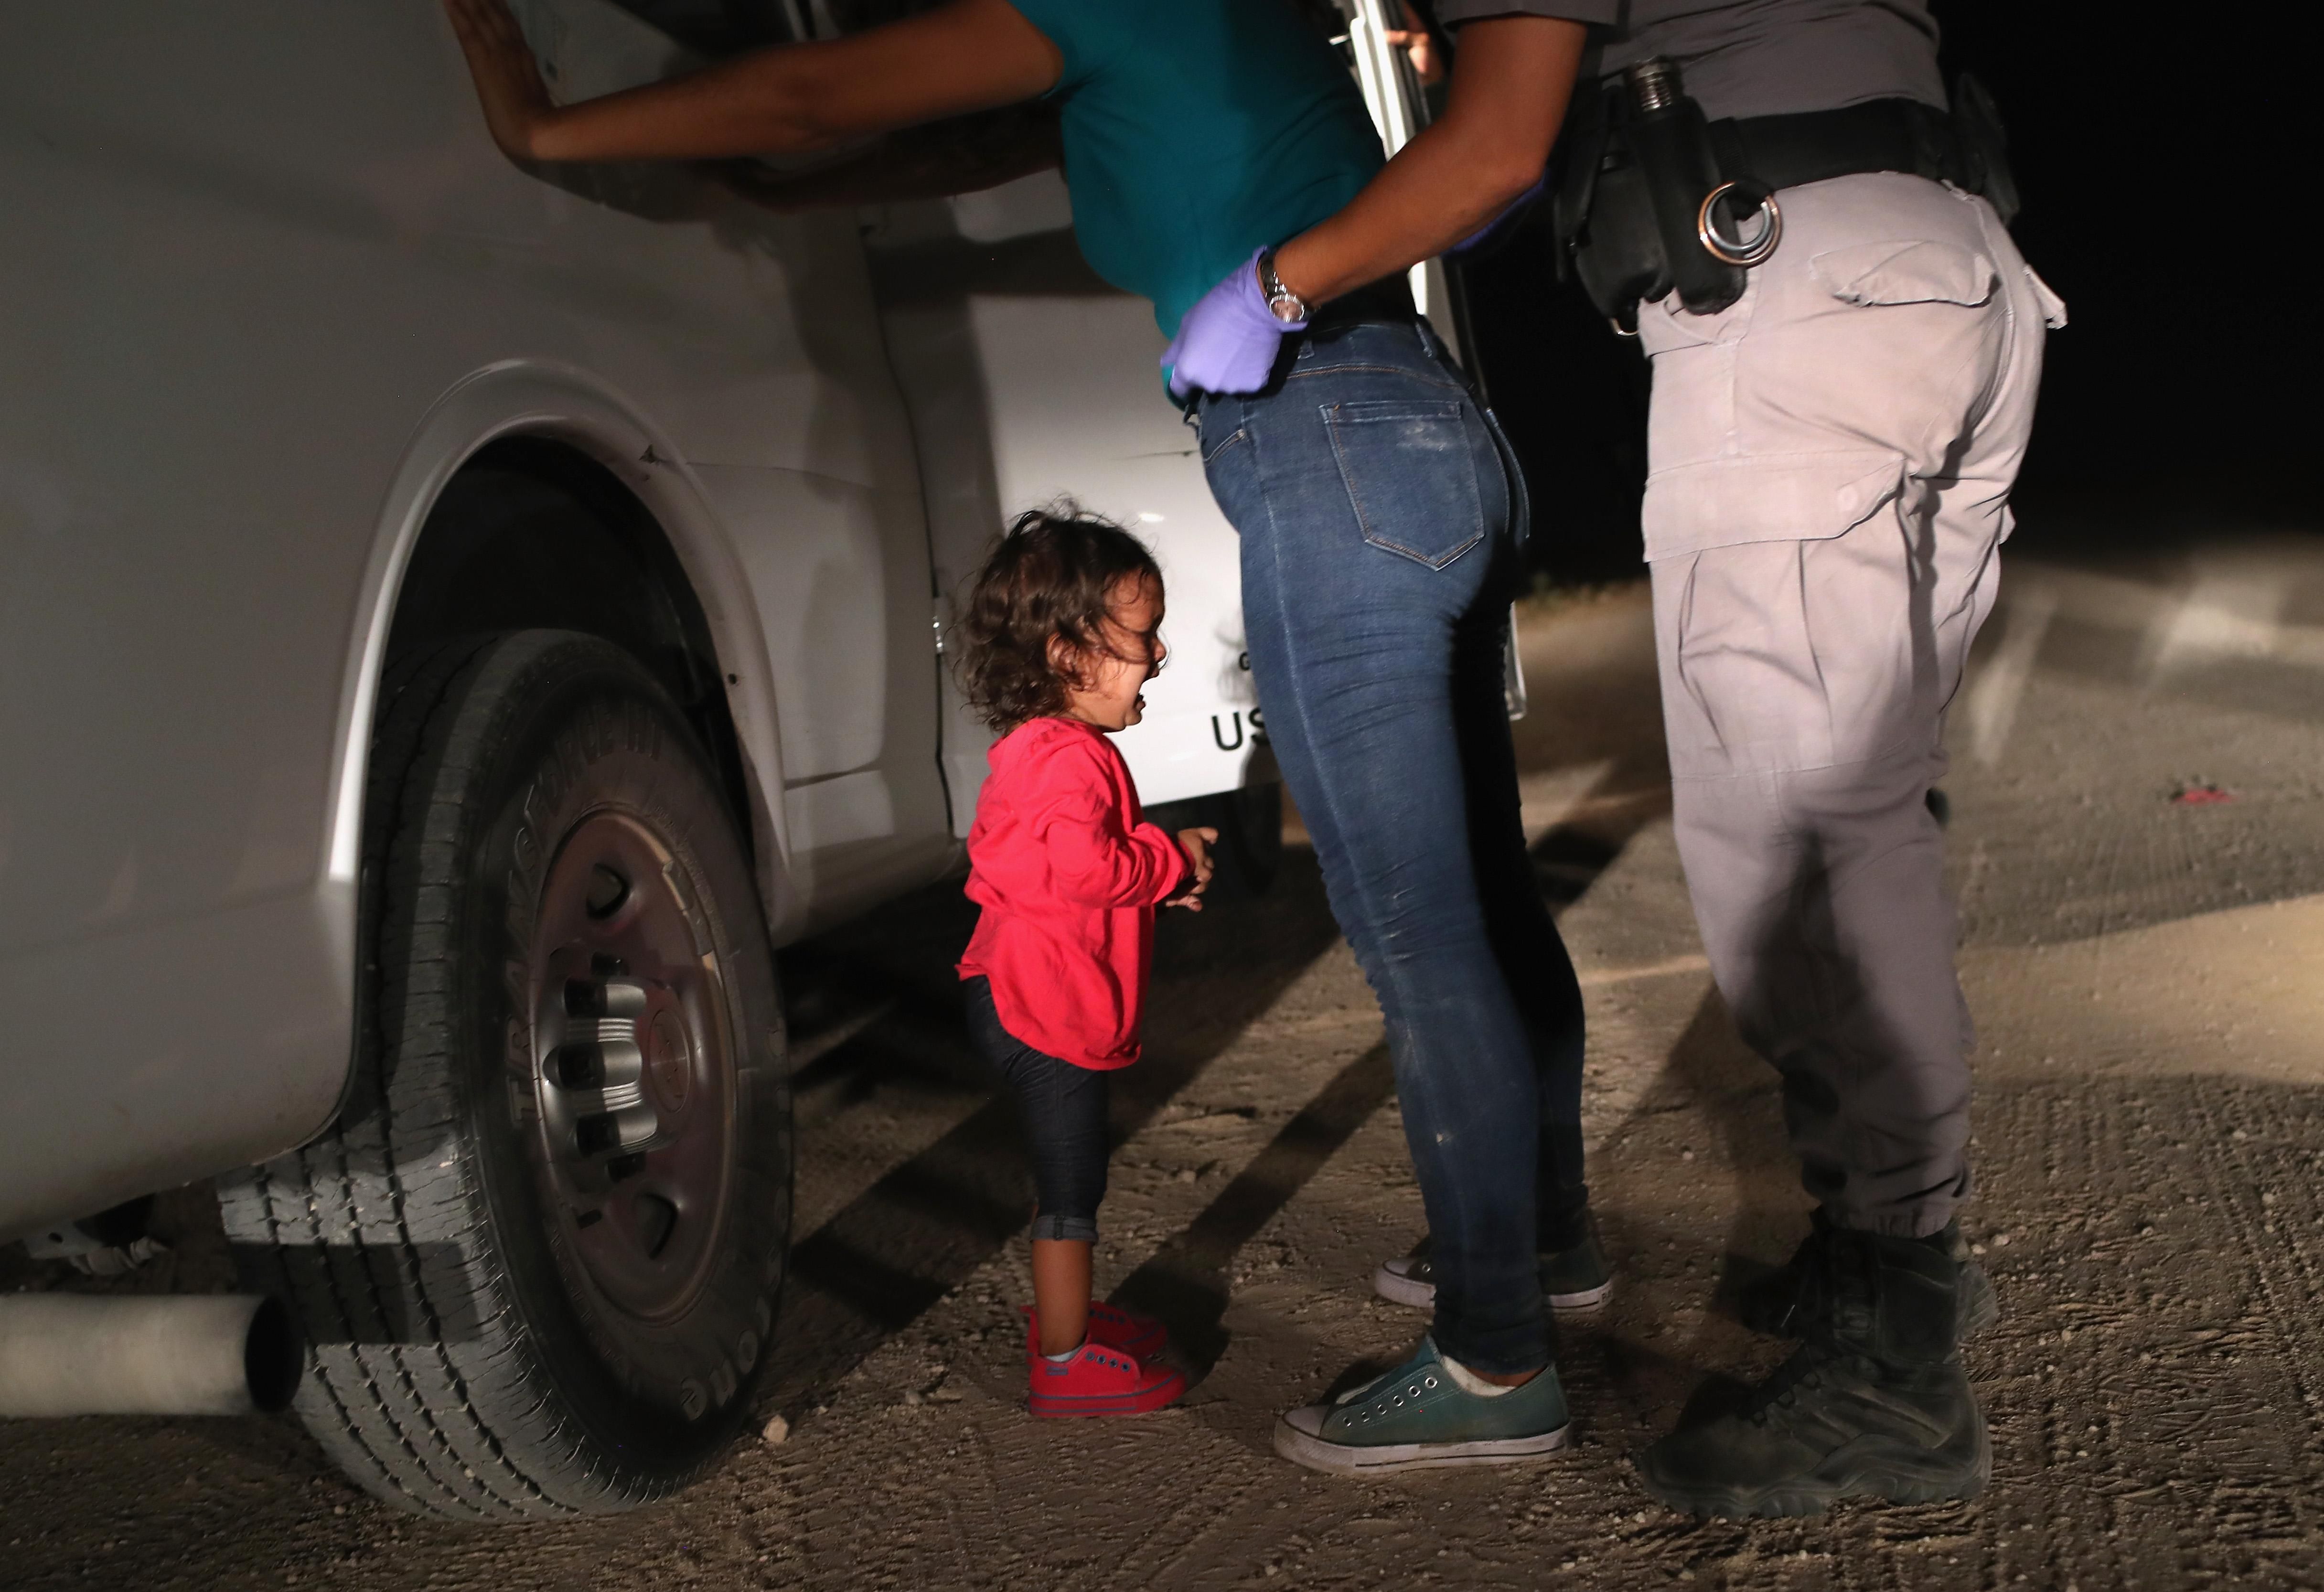 Customs and Border Protection (CBP) is executing the Trump administration's 'zero tolerance' policy towards undocumented immigrants. (Photo by John Moore/Getty Images)